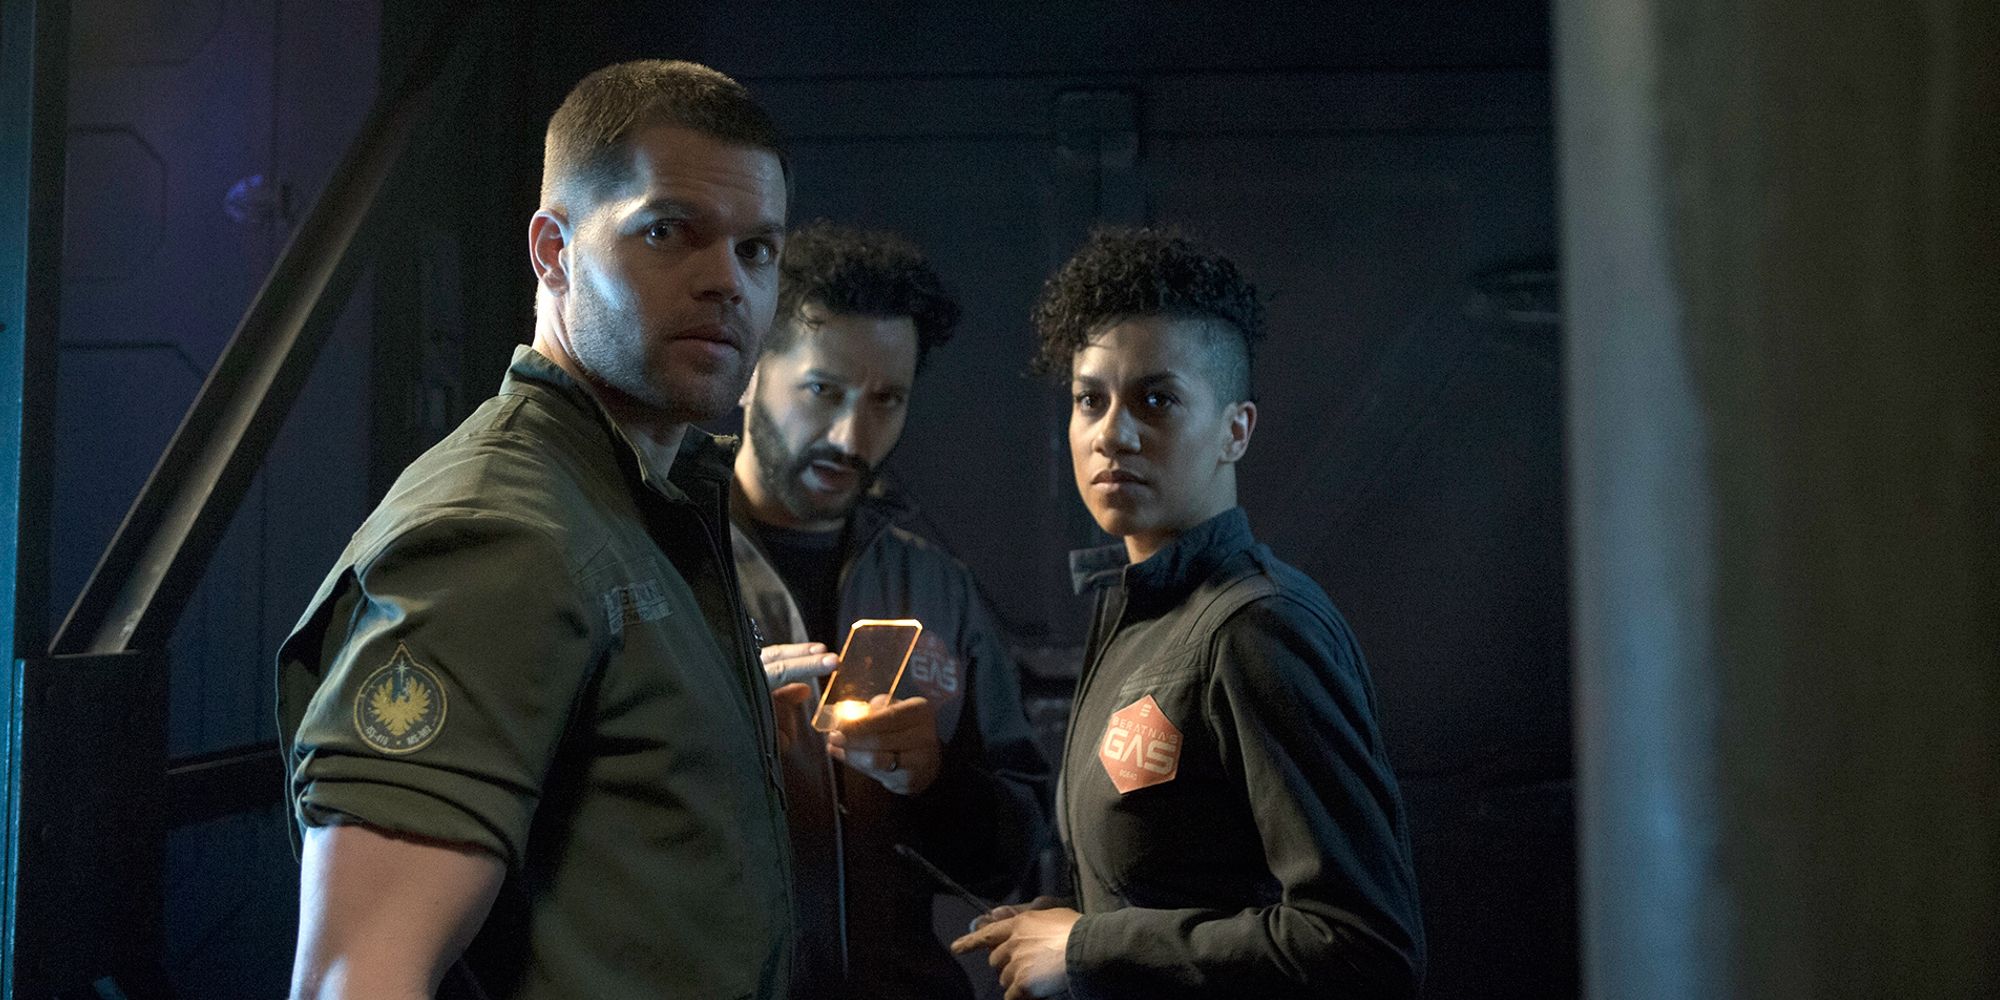 Wes Chatham Cas Anvar and Dominique Tipper in The Expanse Season 3